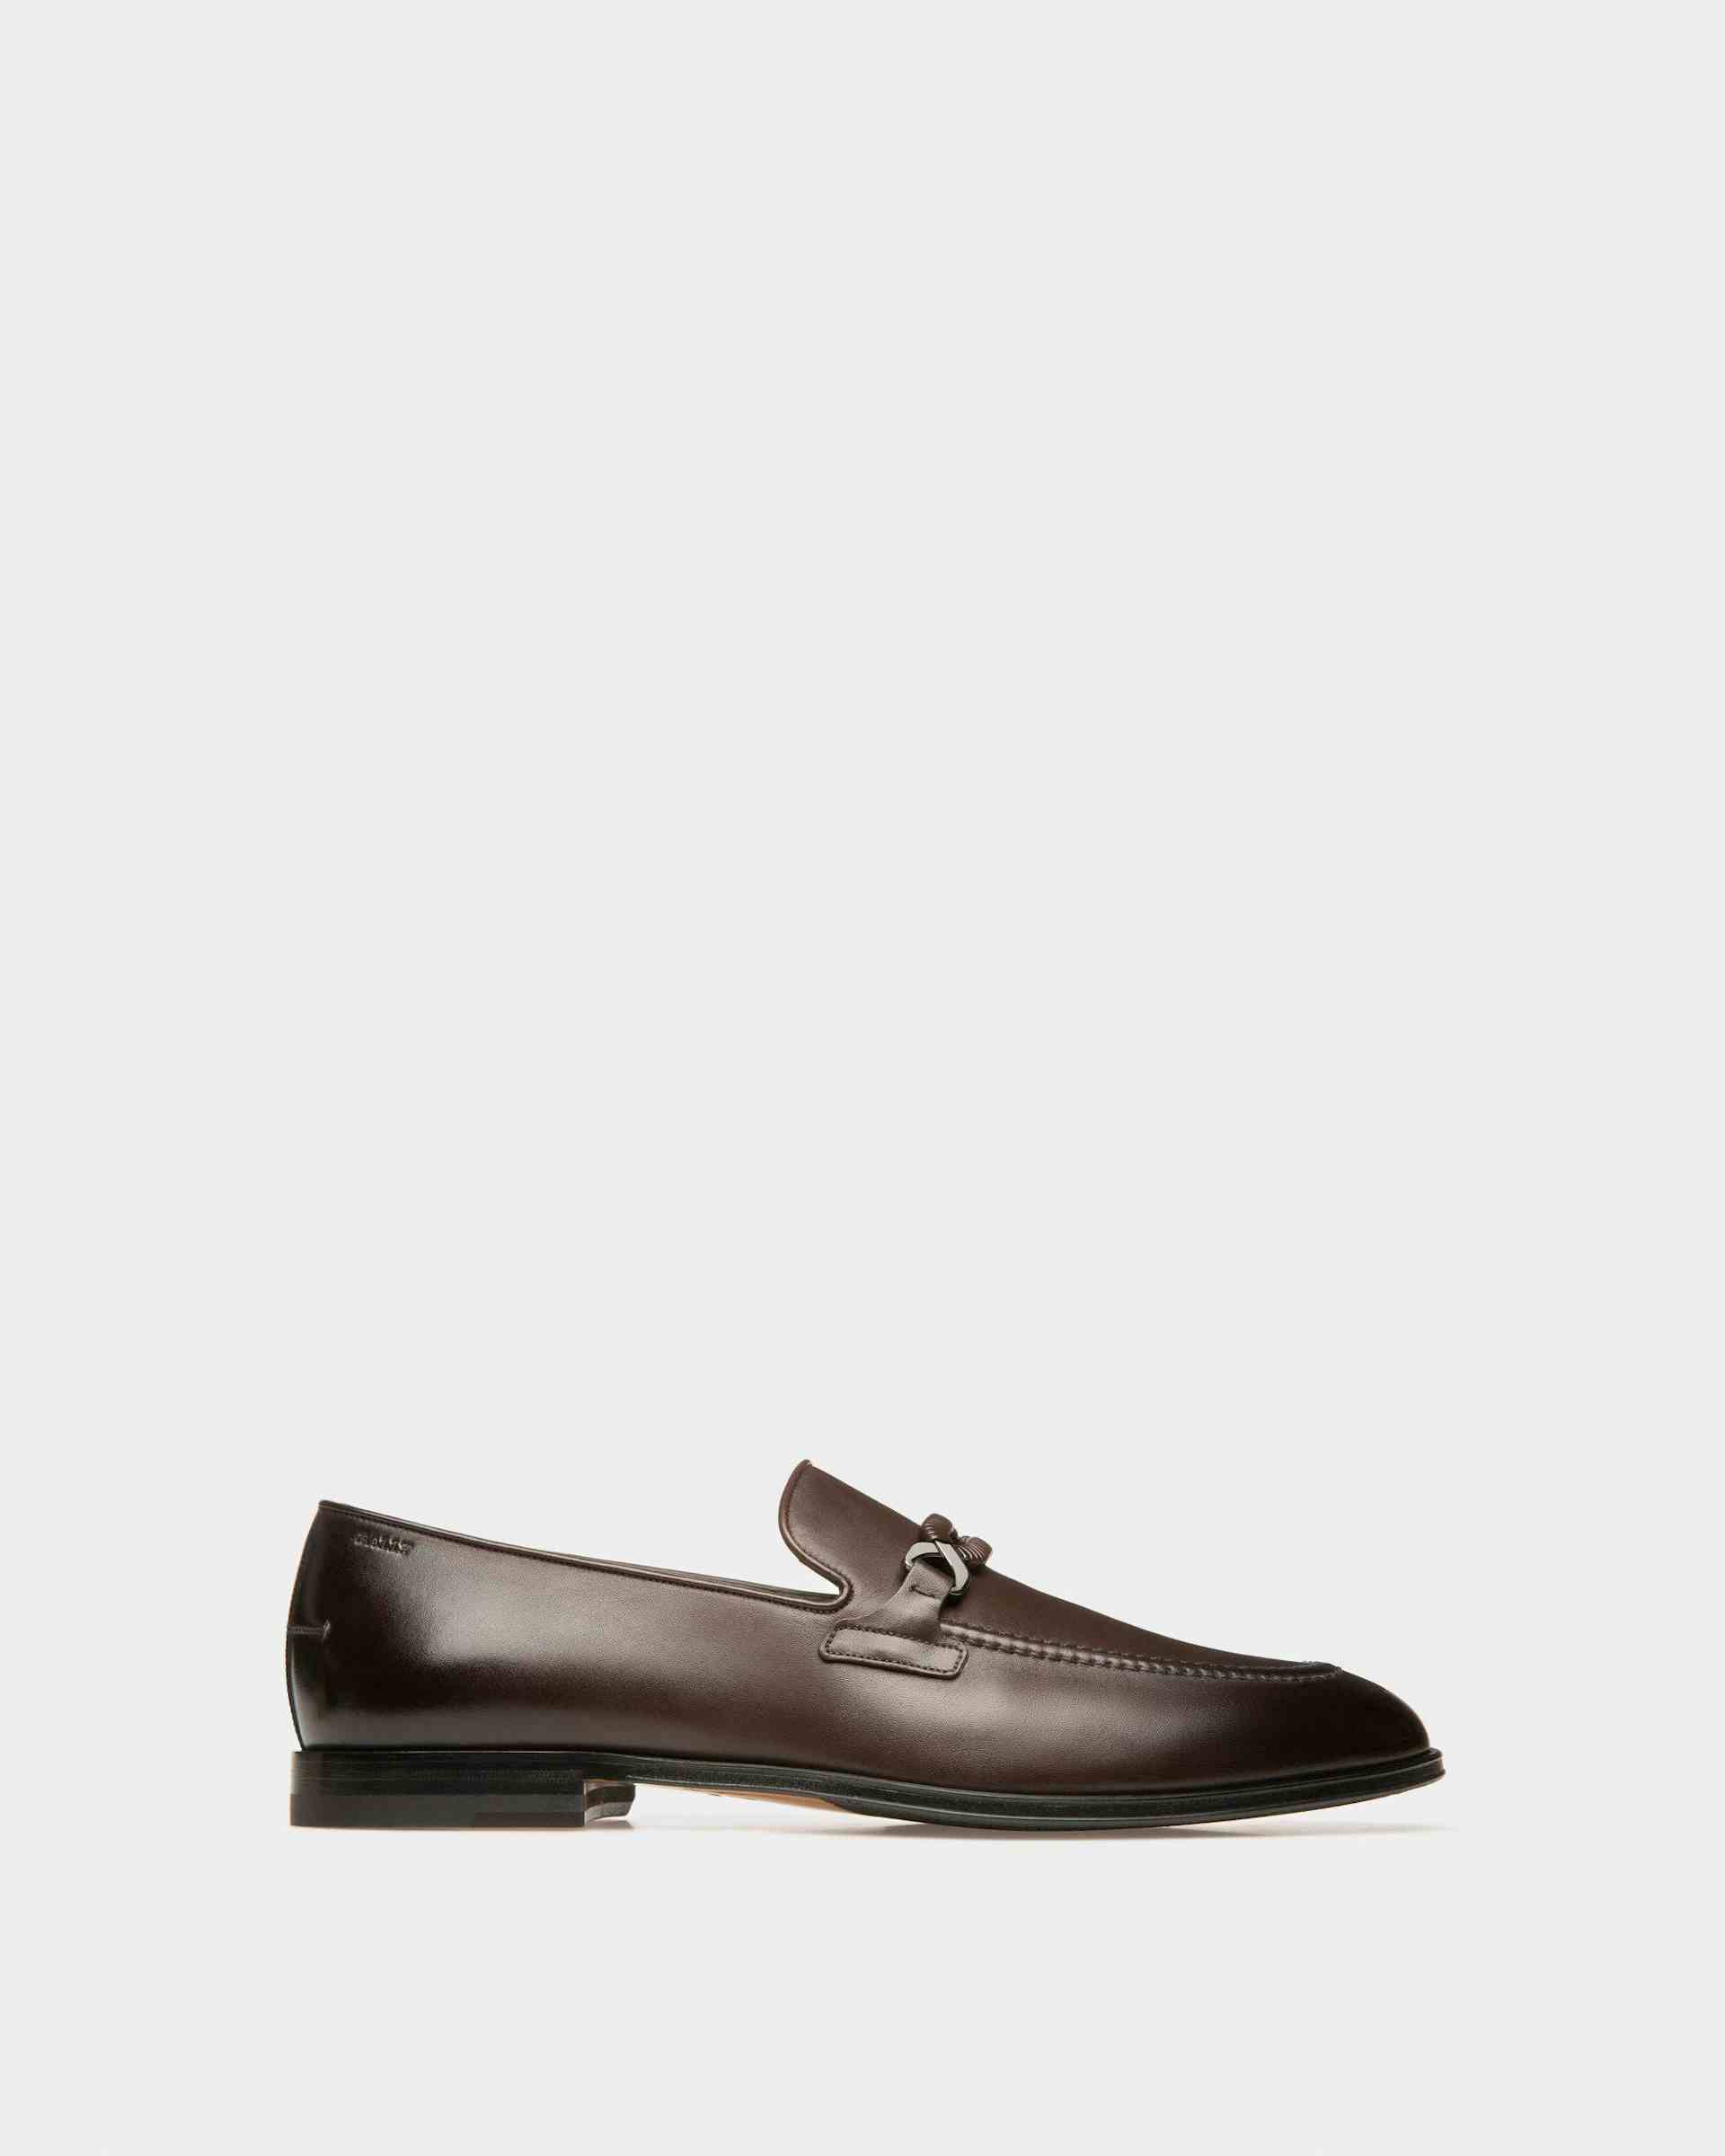 Wernof Leather Loafers In Brown - Men's - Bally